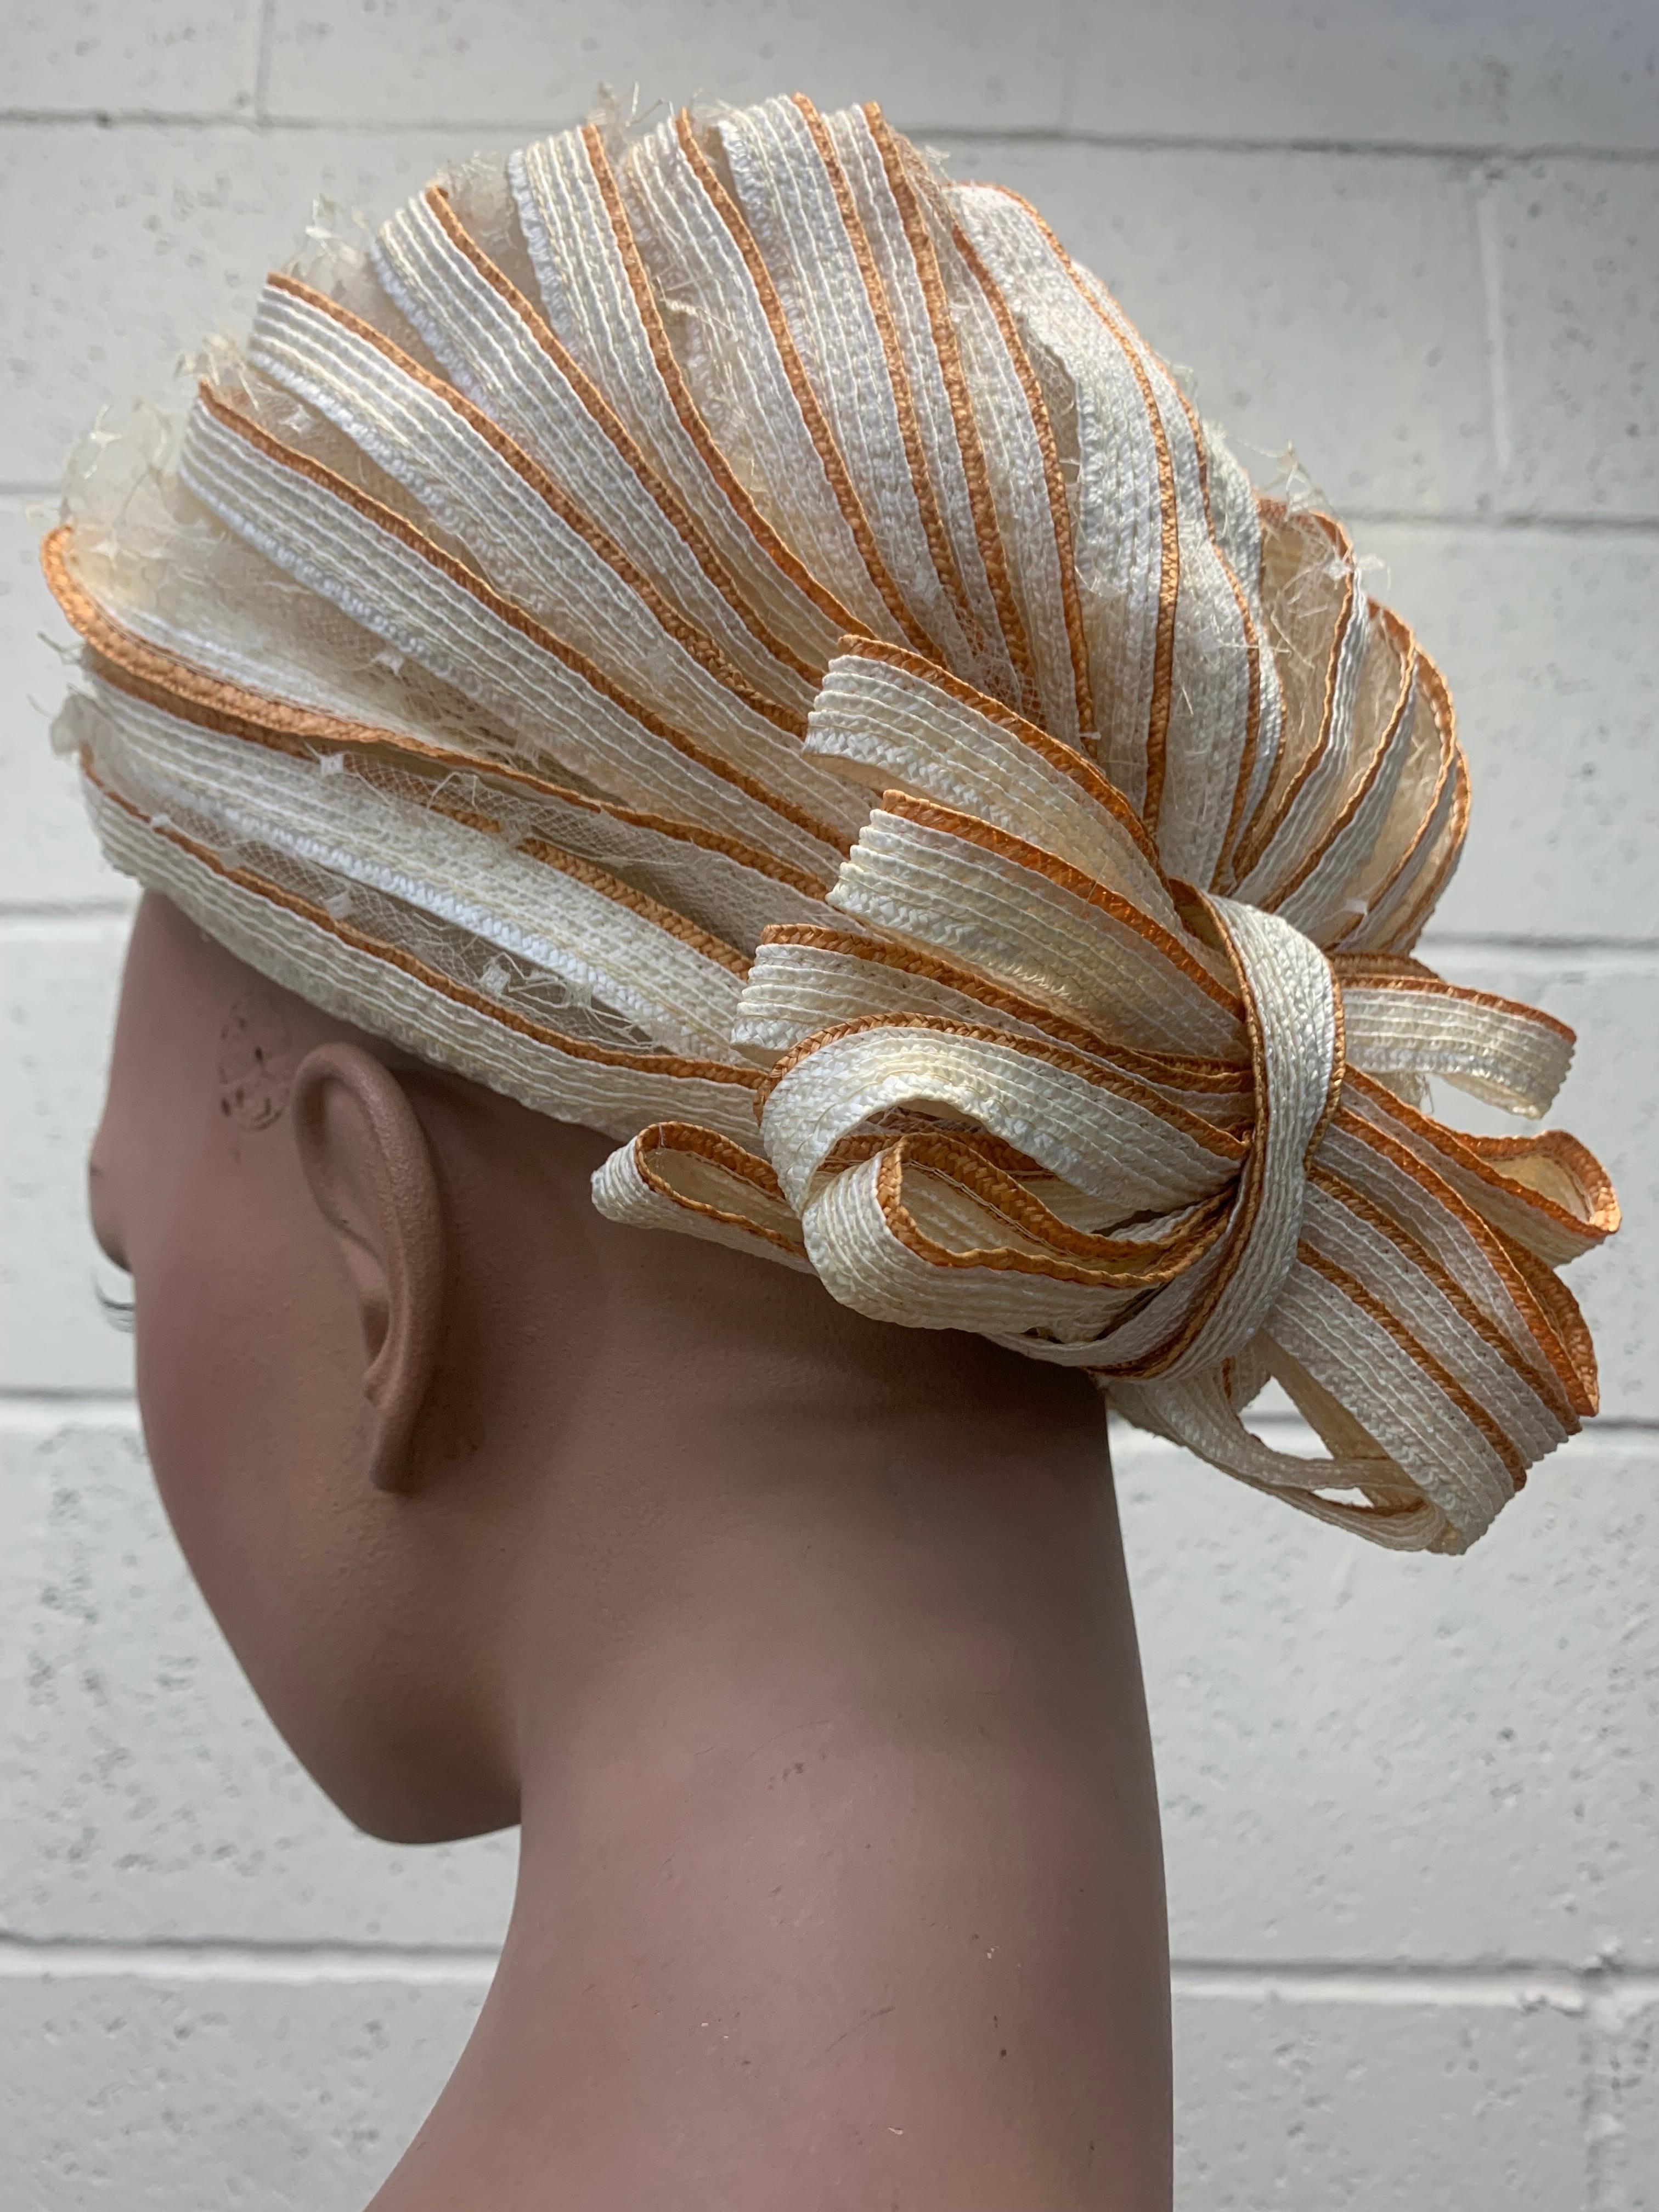 1960s Christian Dior White Striped Straw Turban w Straw Bows at Back:  White straw ribbons with natural straw at edge are backed by a delicate veiling understructure. Designed by Marc Bohan for Christian Dior. Size M. 